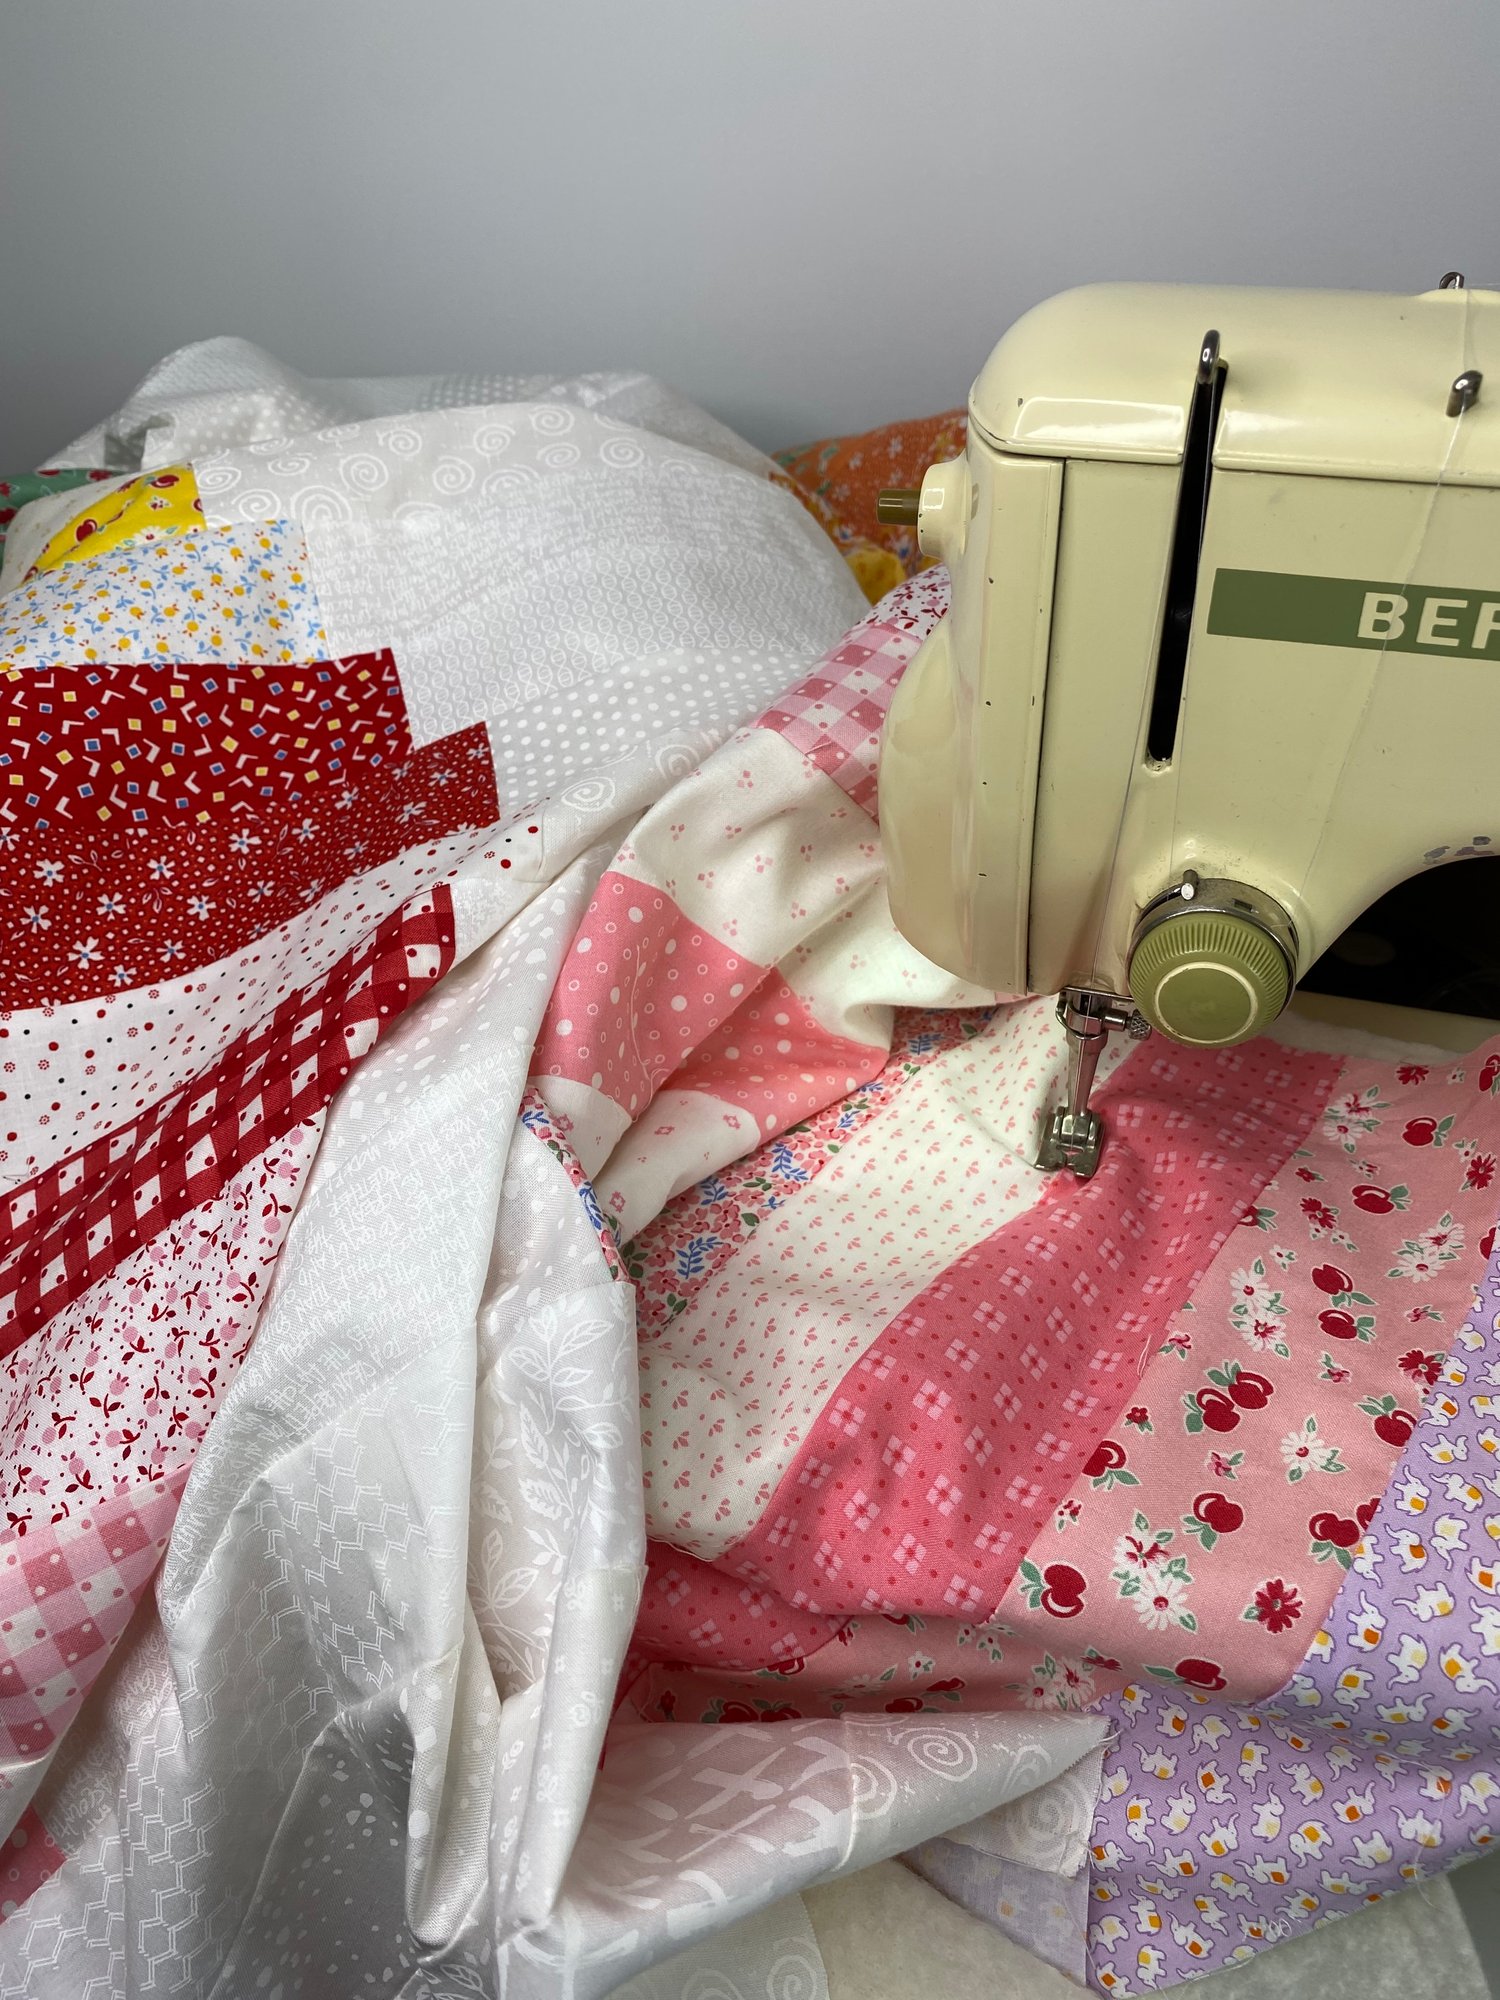 An antique Bernina Sewing Machine in the process of quilting a modern patchwork quilt top.